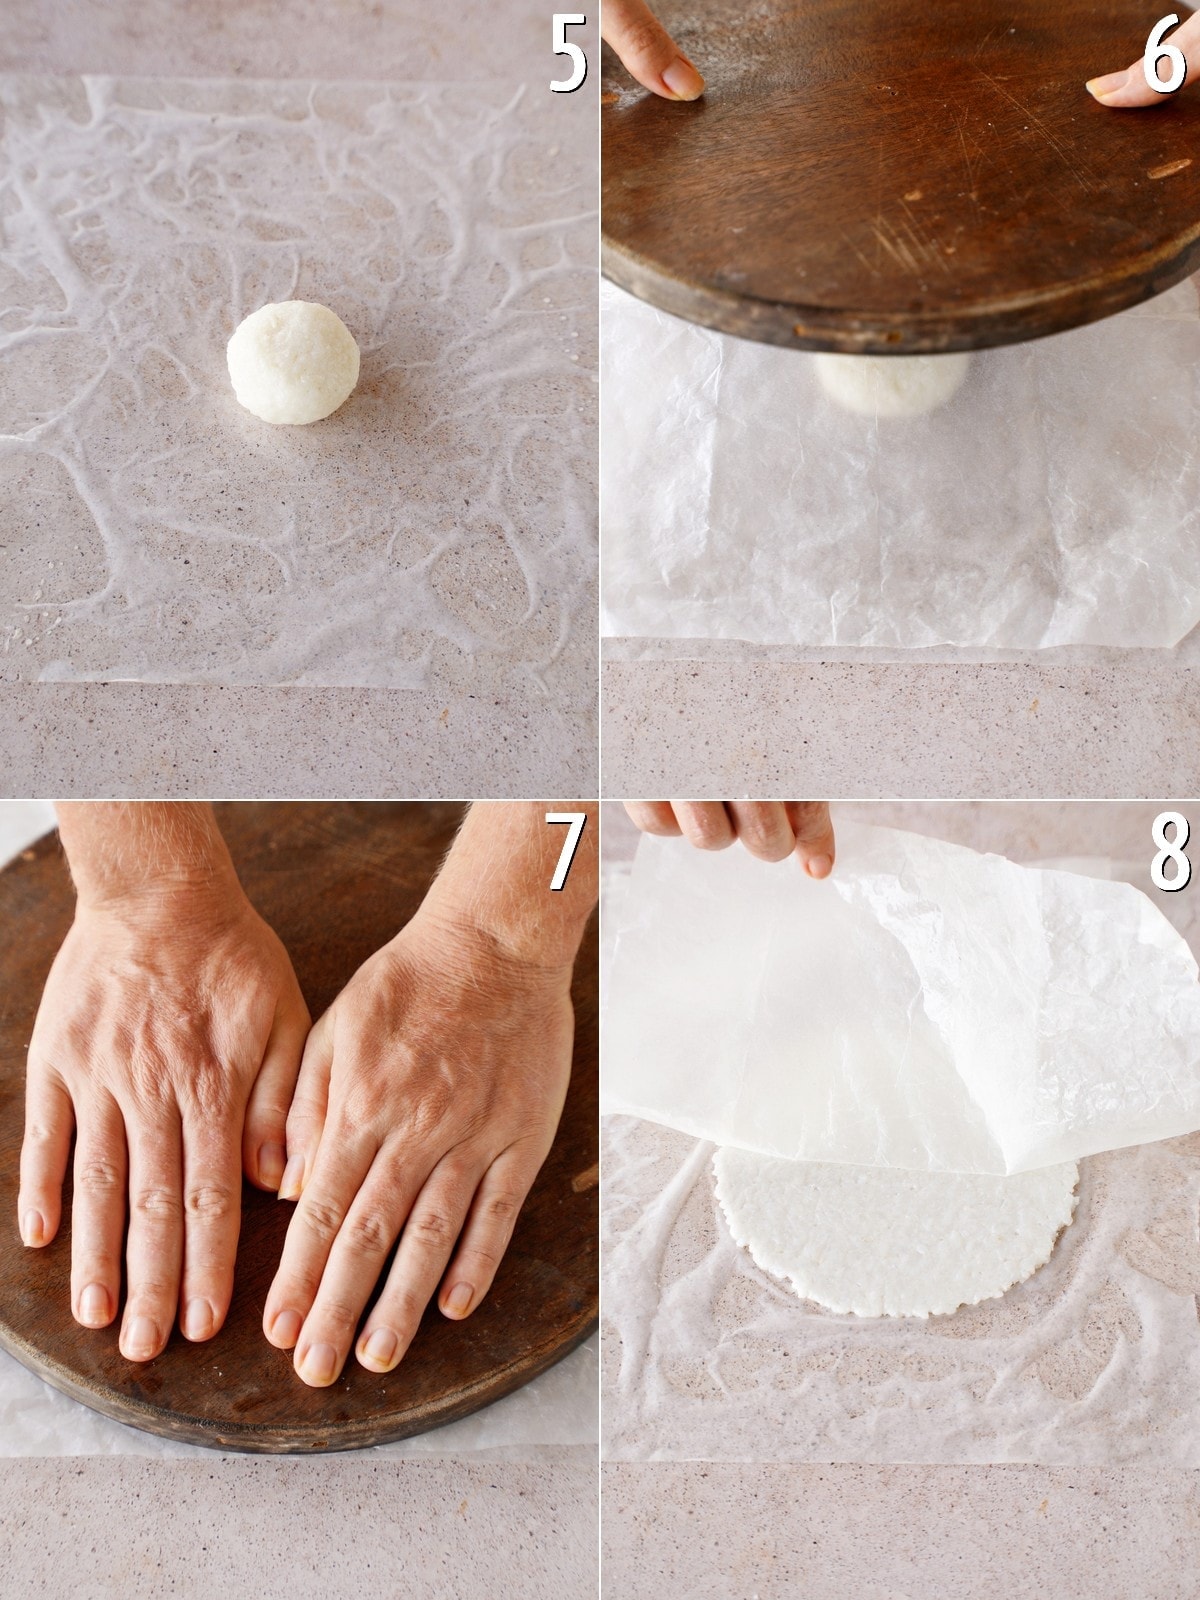 4 step-by-step photos showing how to press a rice ball